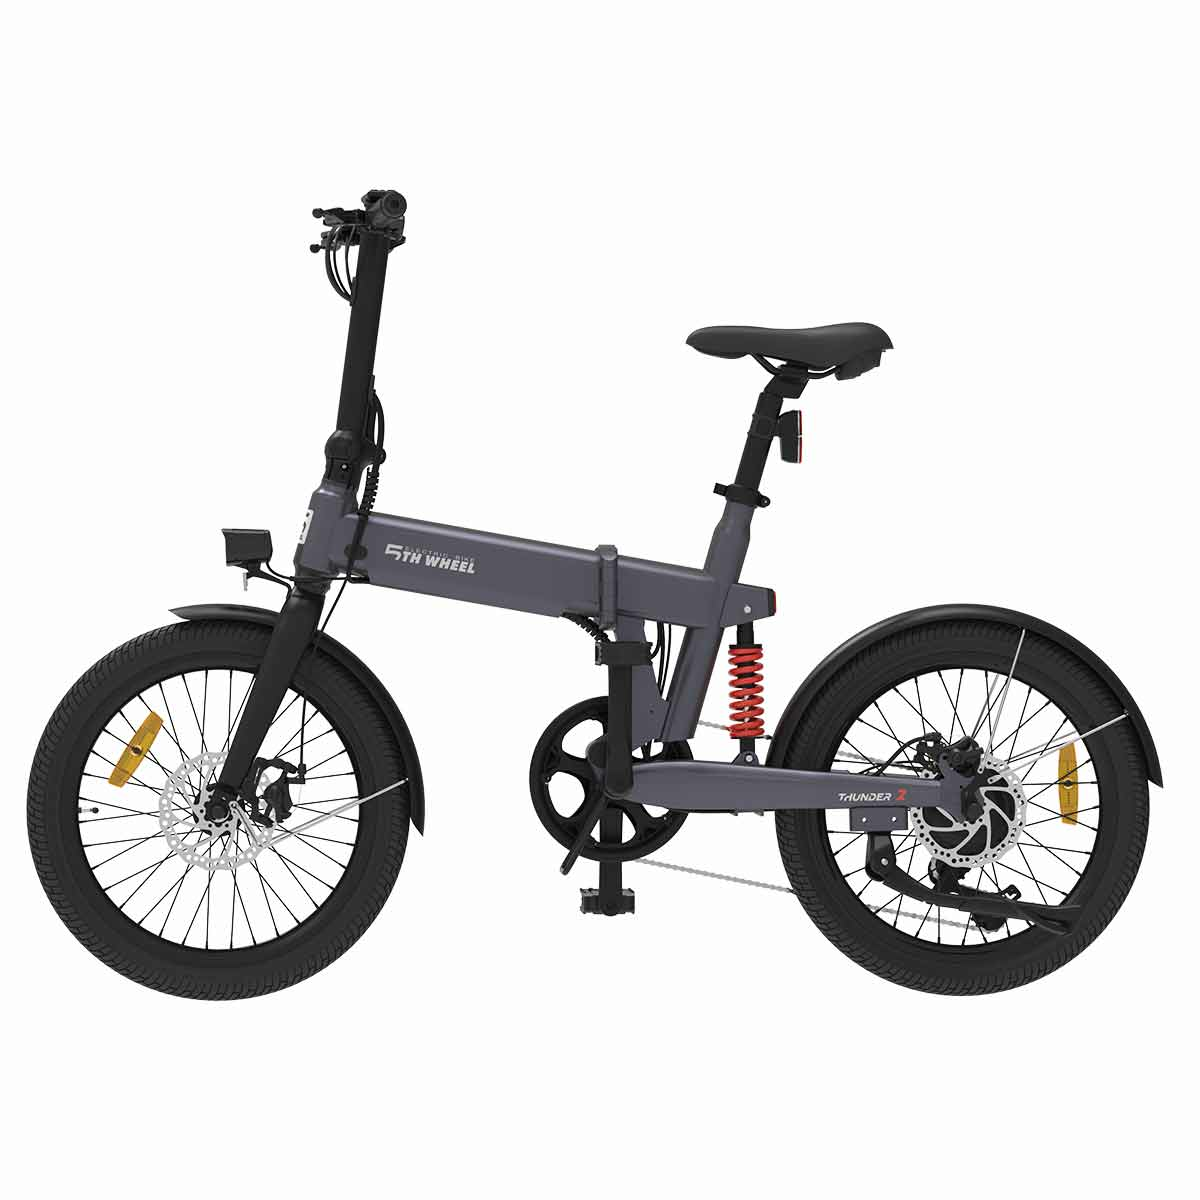 best price,5th,wheel,thunder,eb05,36v,10.4ah,350w,electric,bicycle,20inch,discount